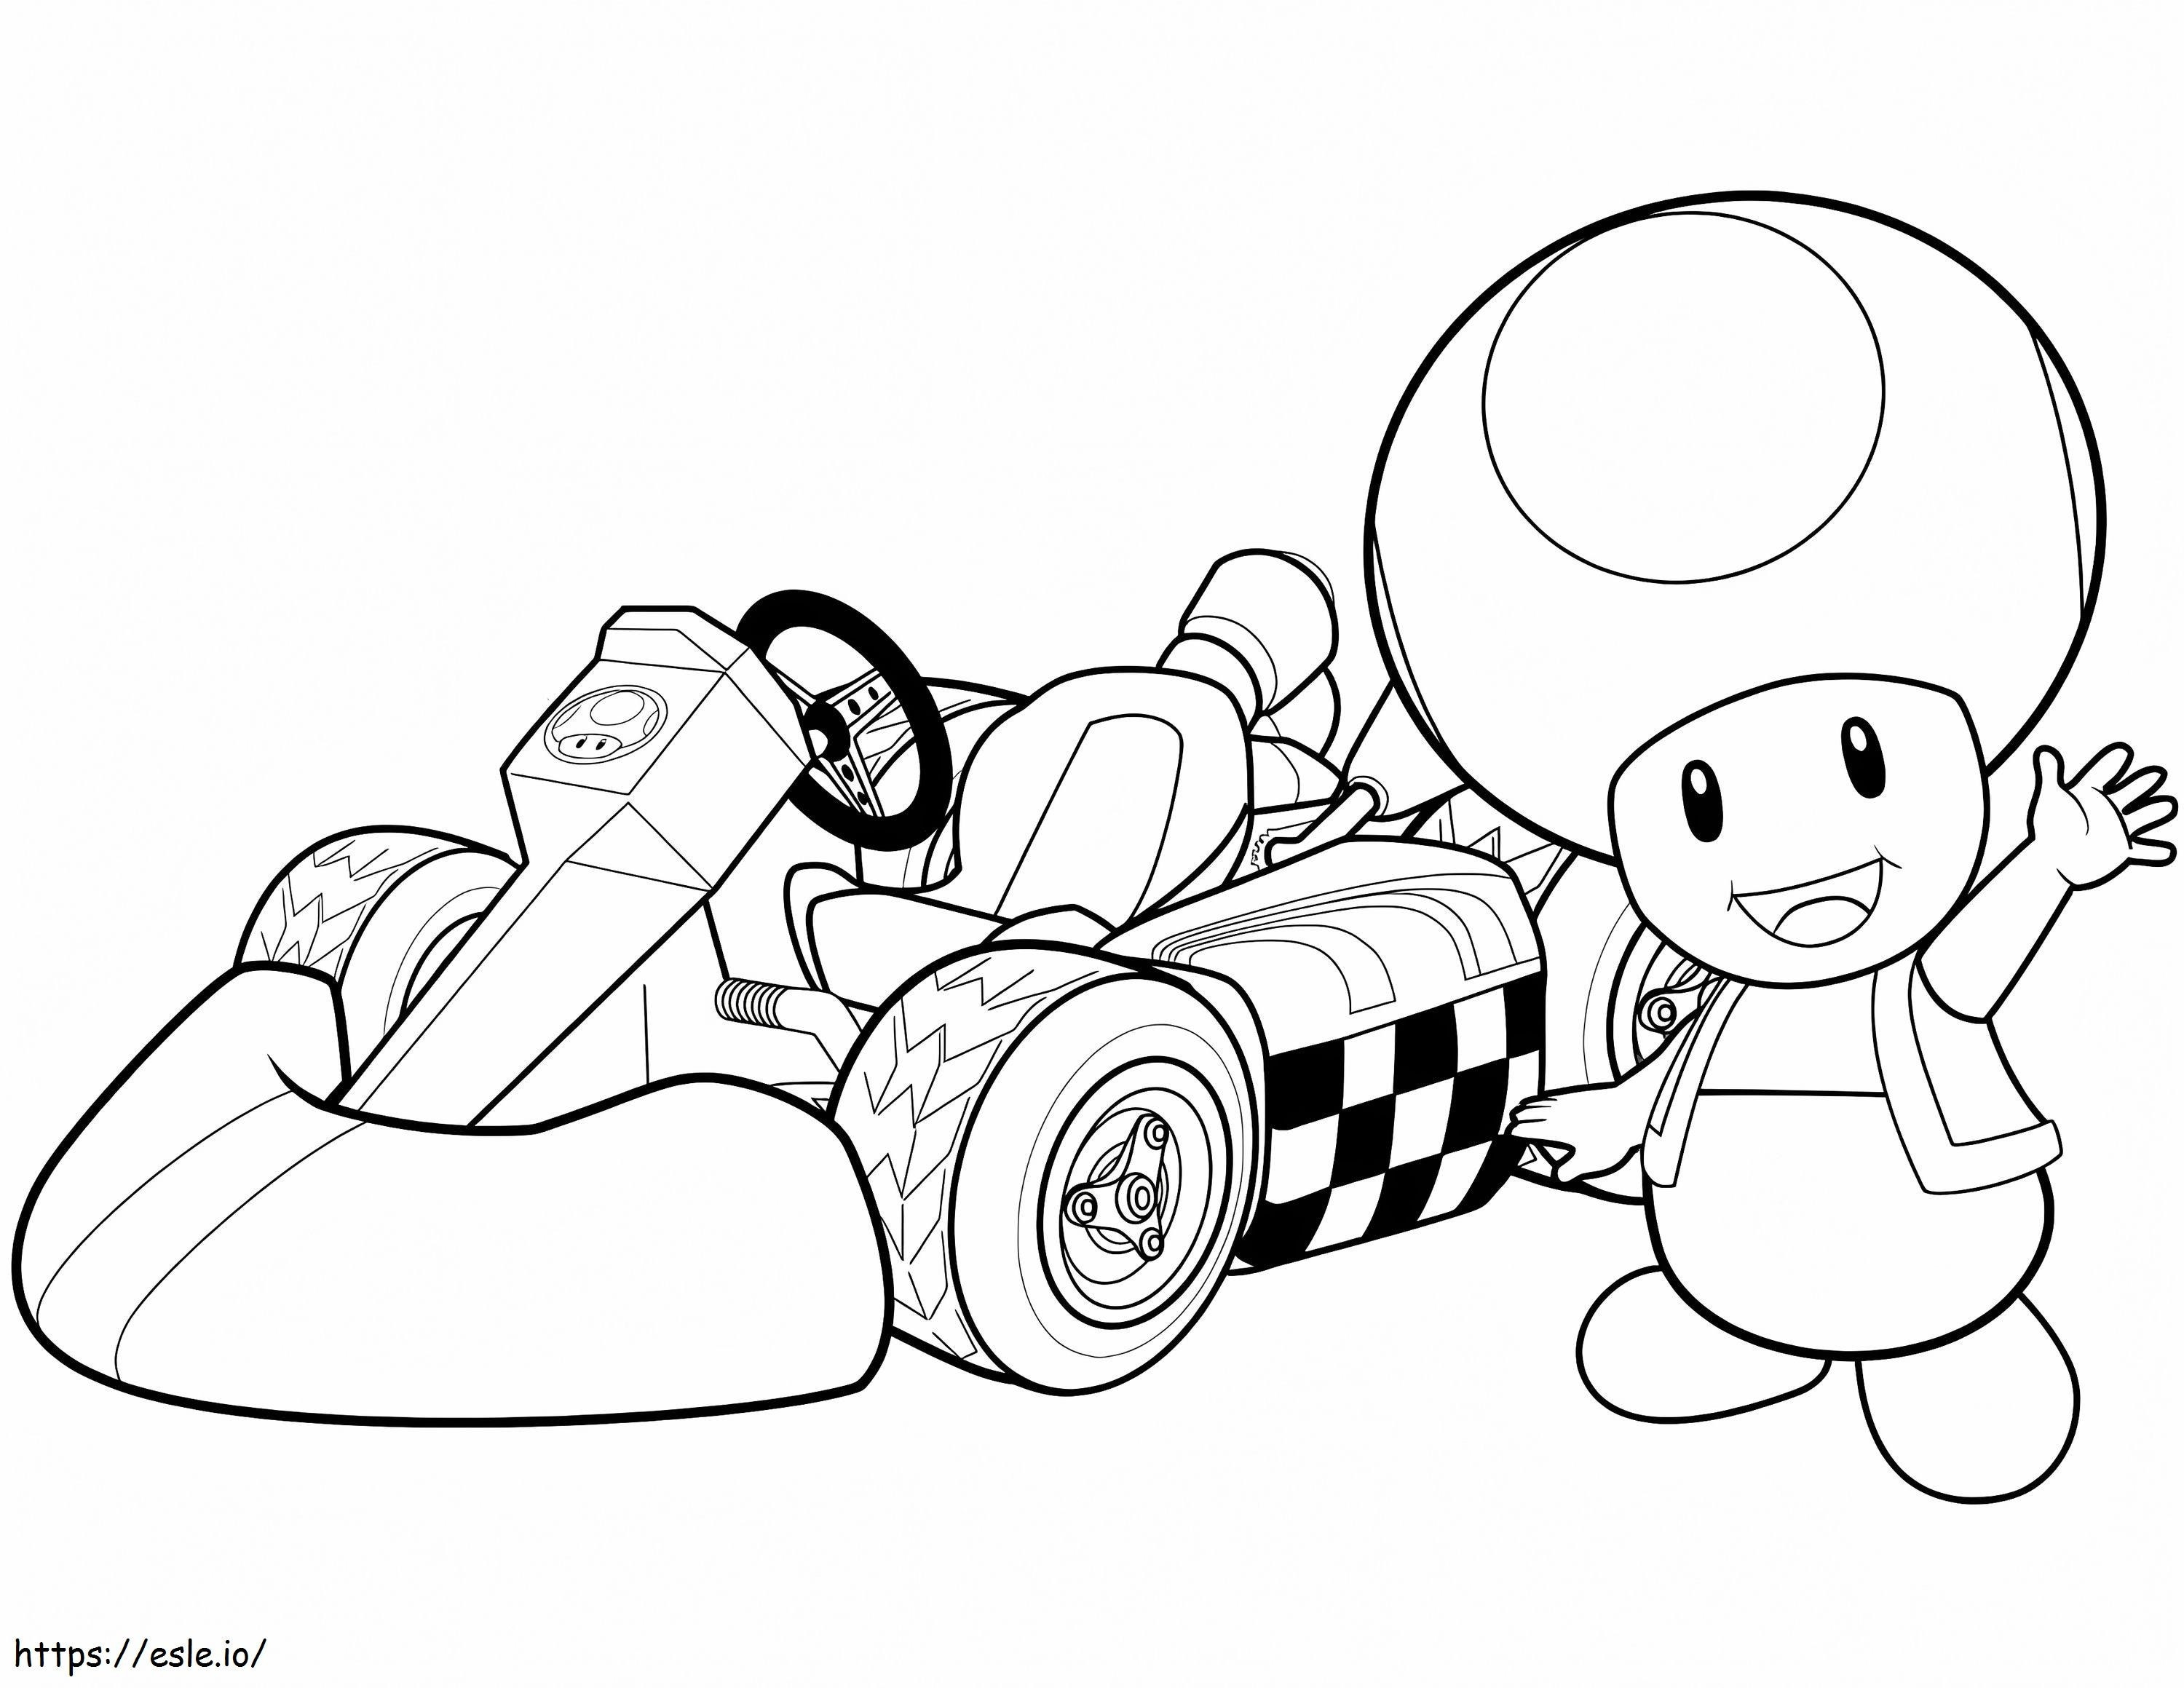 Toad In Mario Kart Wii coloring page